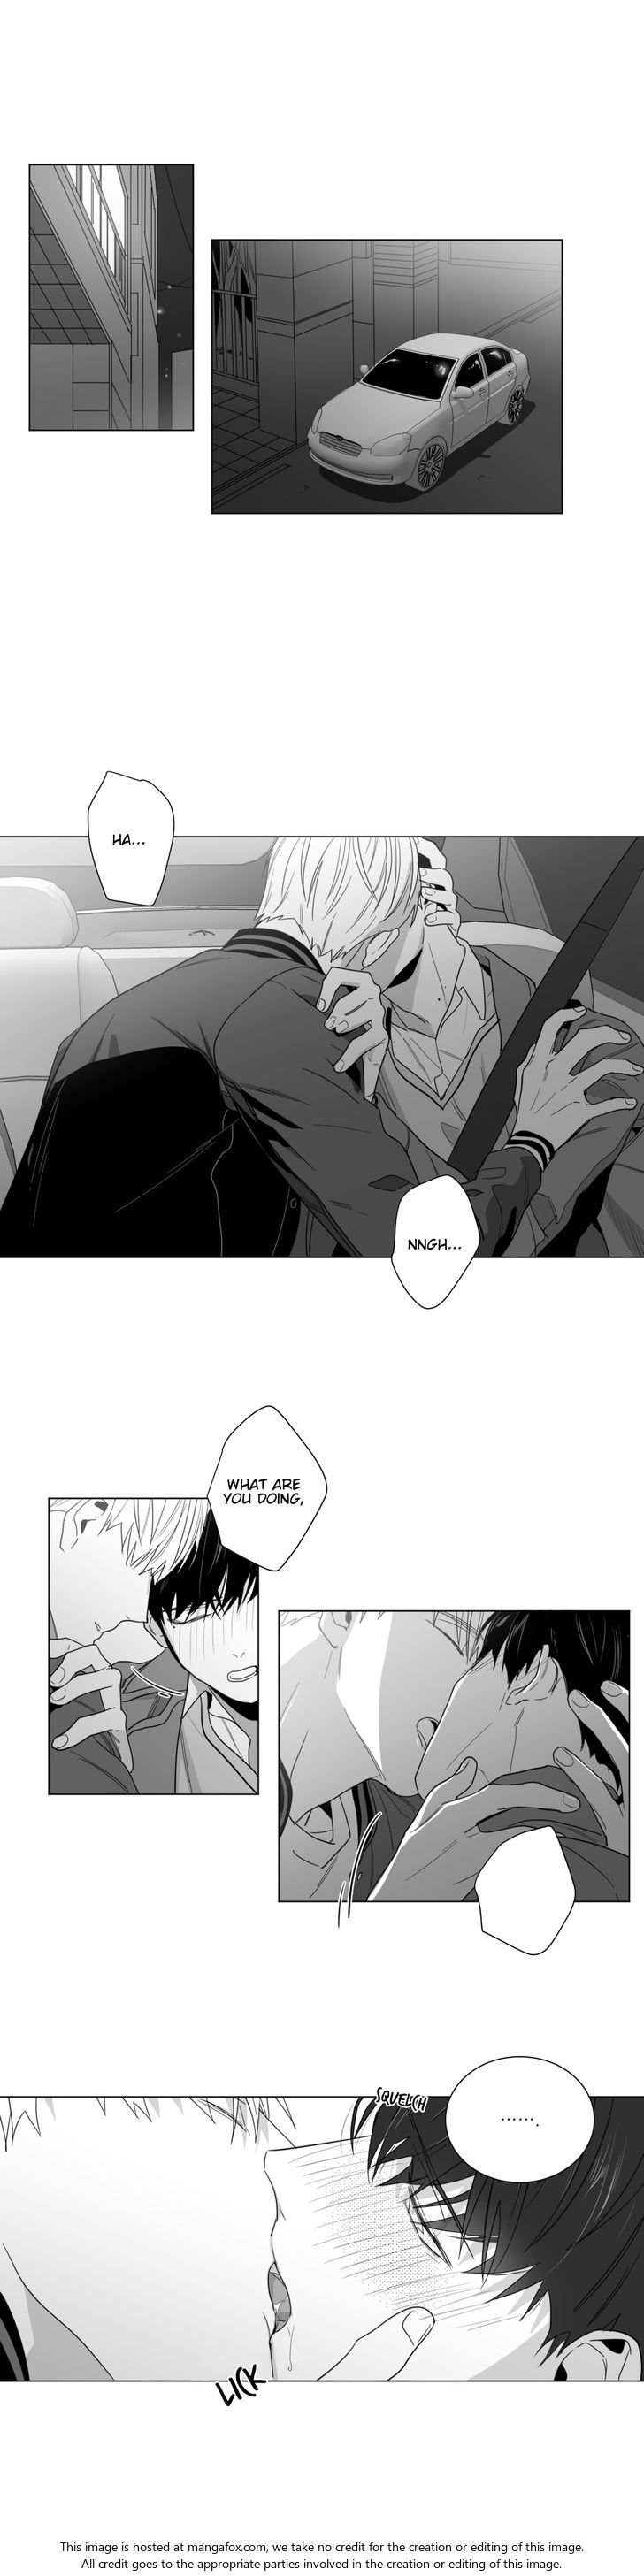 Lover Boy (Lezhin) Chapter 026 page 2